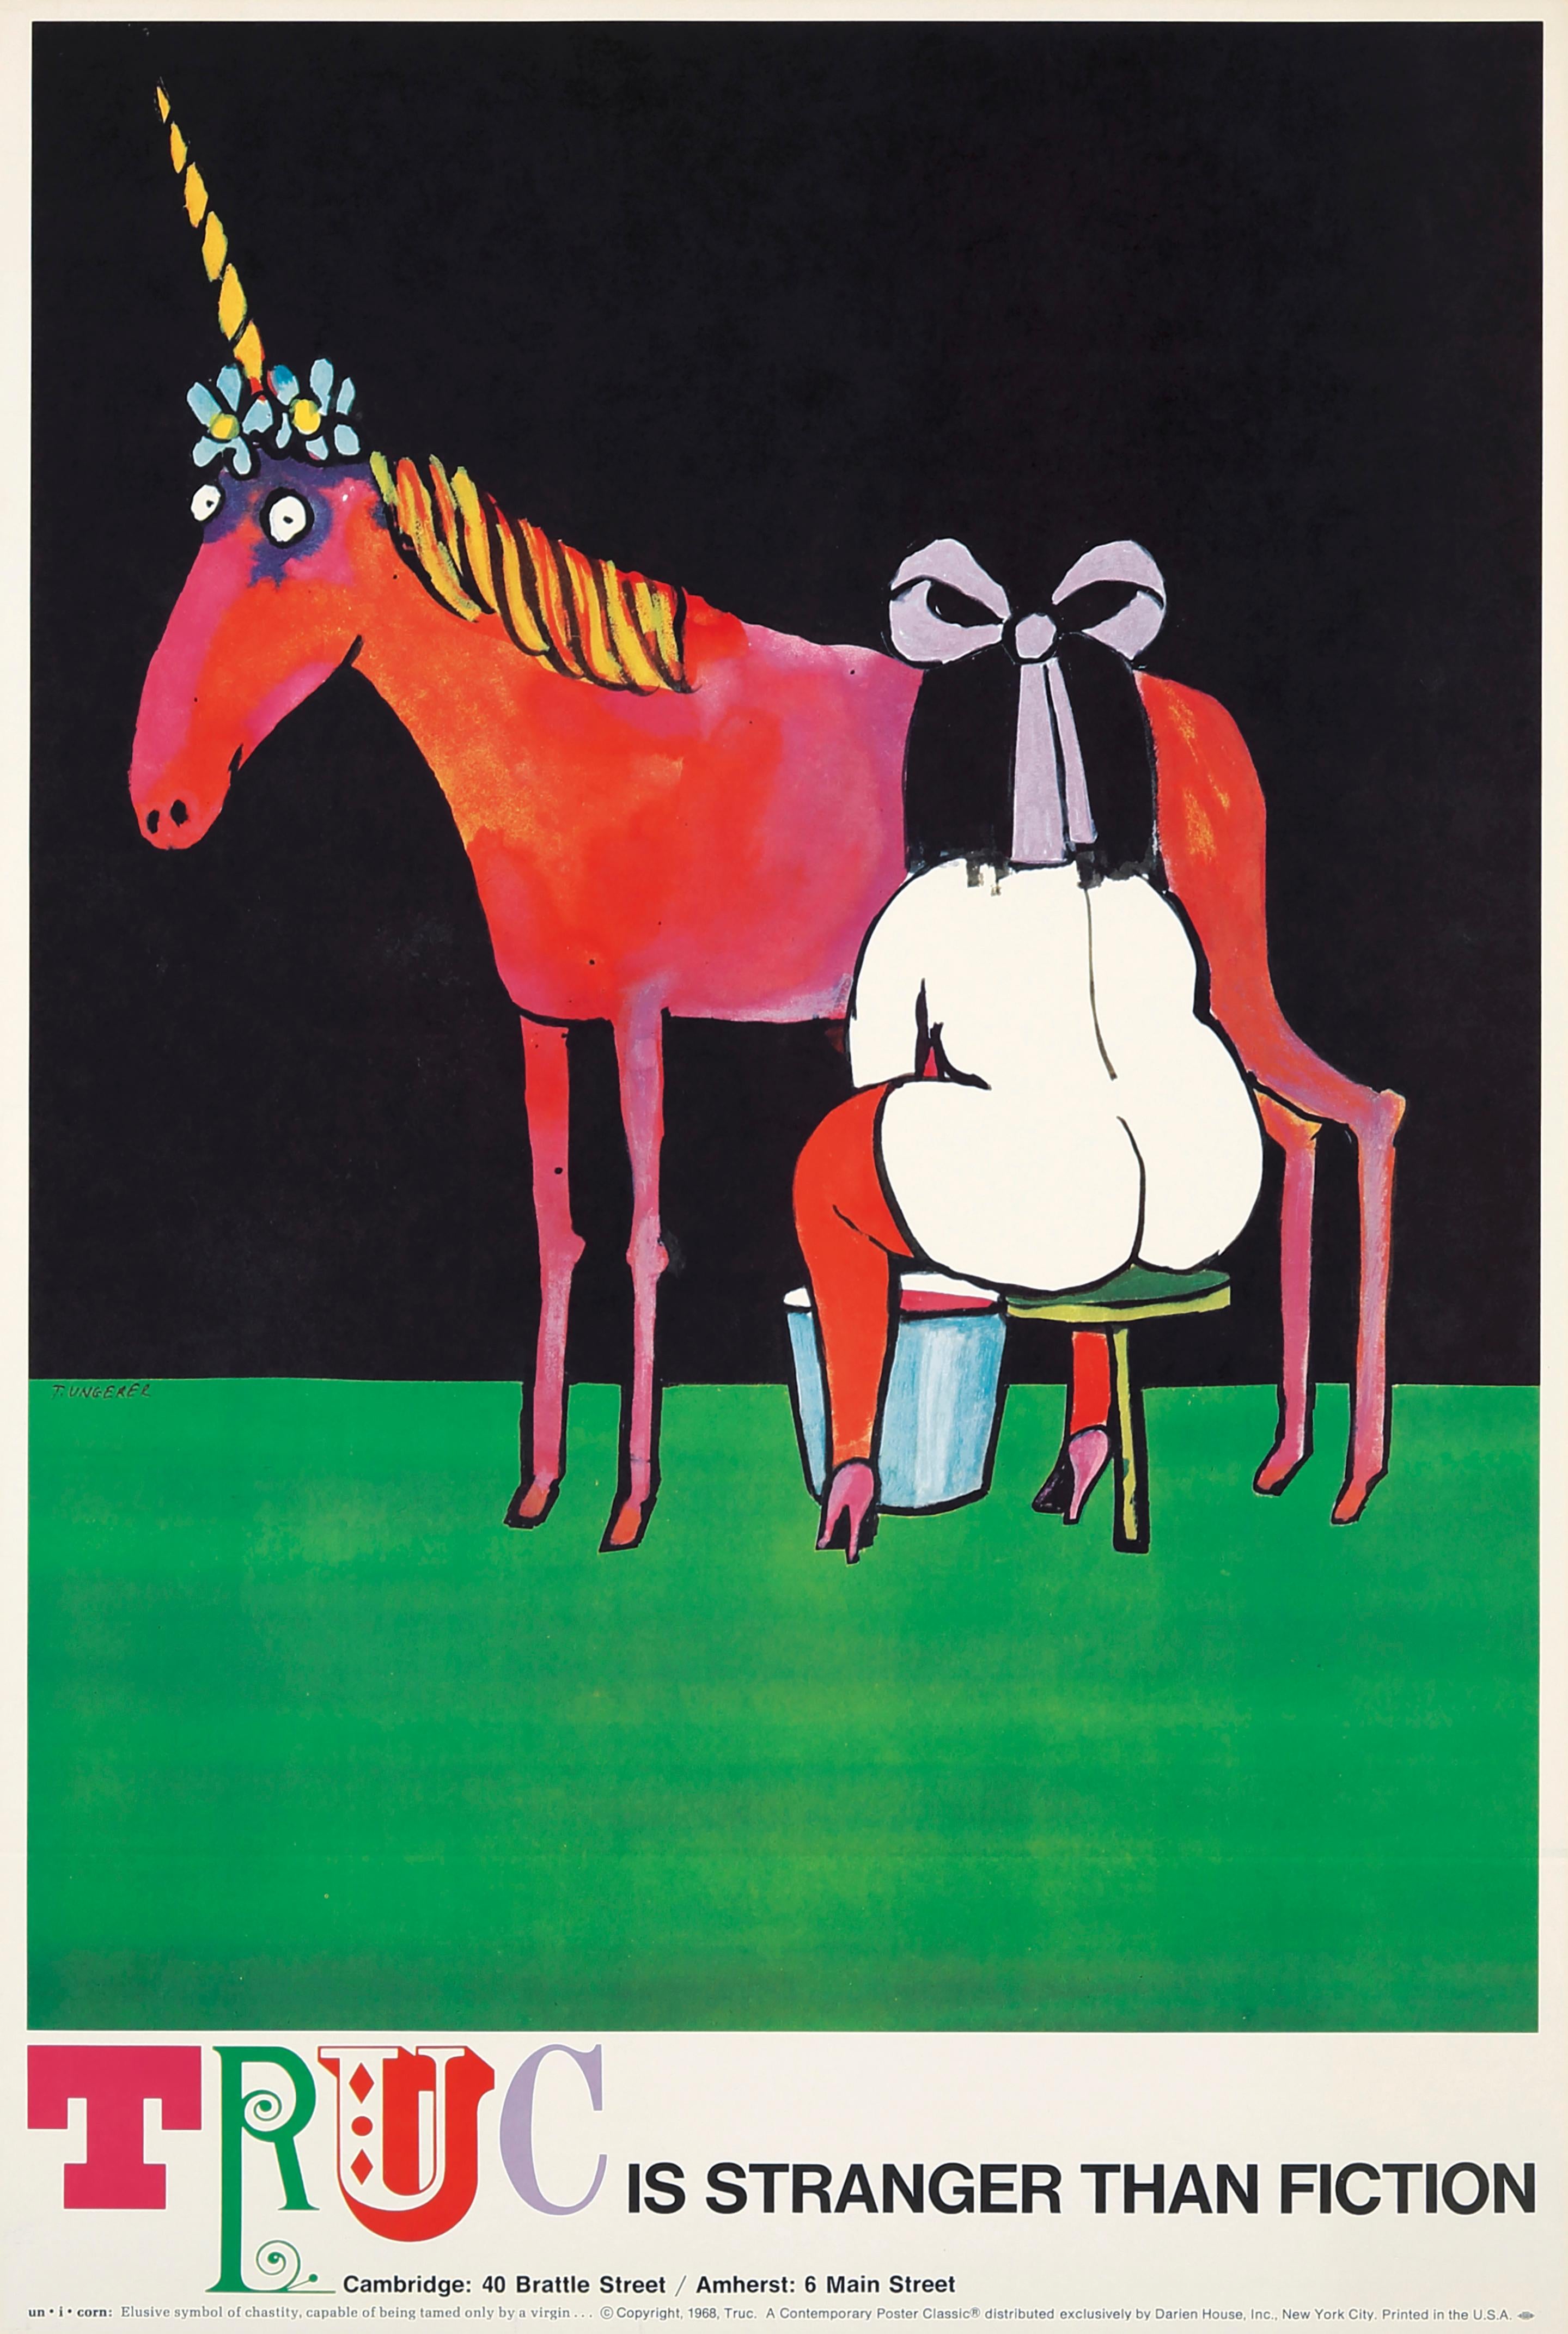 Tomi Ungerer, Truc/Stranger Than Fiction, Cambridge, 1968:
Towing the line between his timeless and most adorable children’s book illustrations and some of his more titillating designs for humorous erotica, this poster promotes the now-closed,